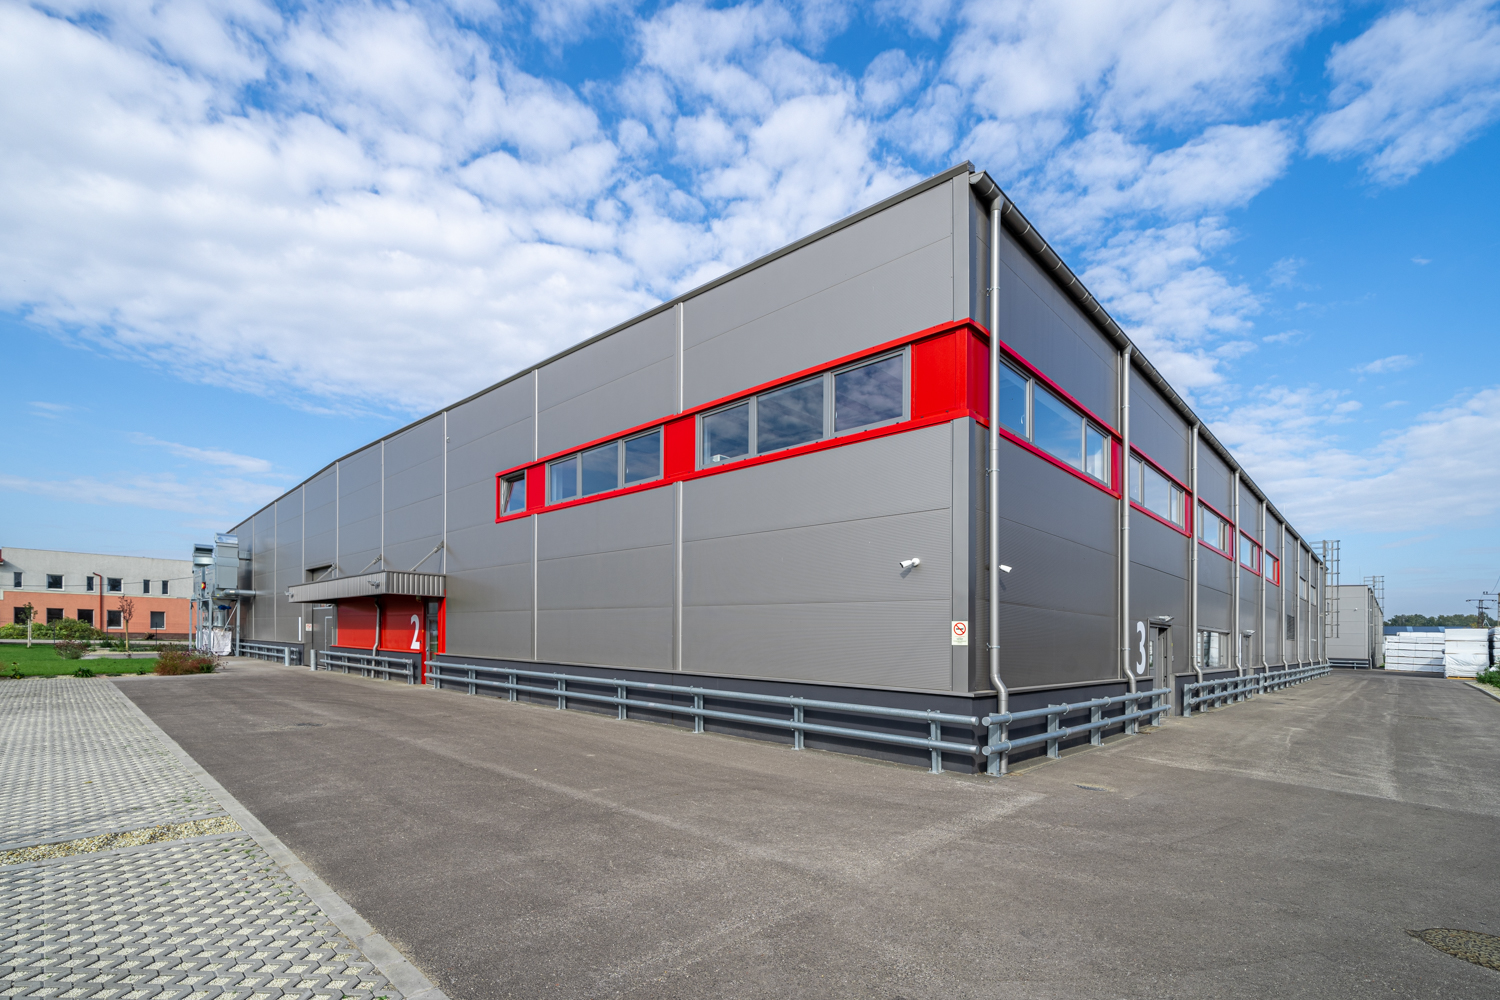 We handed over the plant, warehouse and office buildings of Forintrade Kft. in Dunavarsány.